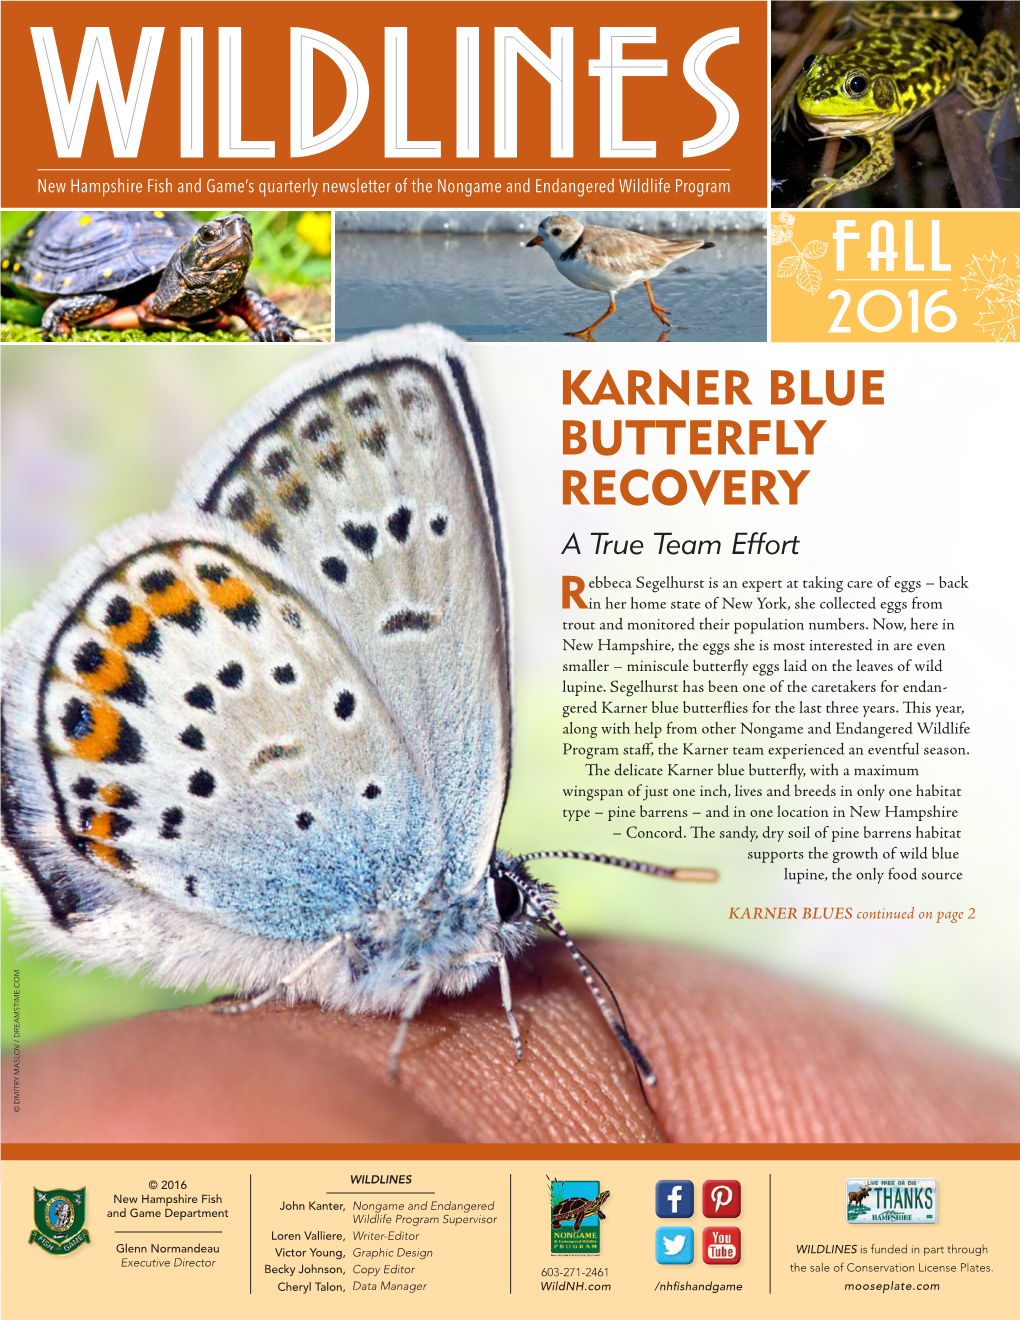 Karner Blue Butterfly Recovery